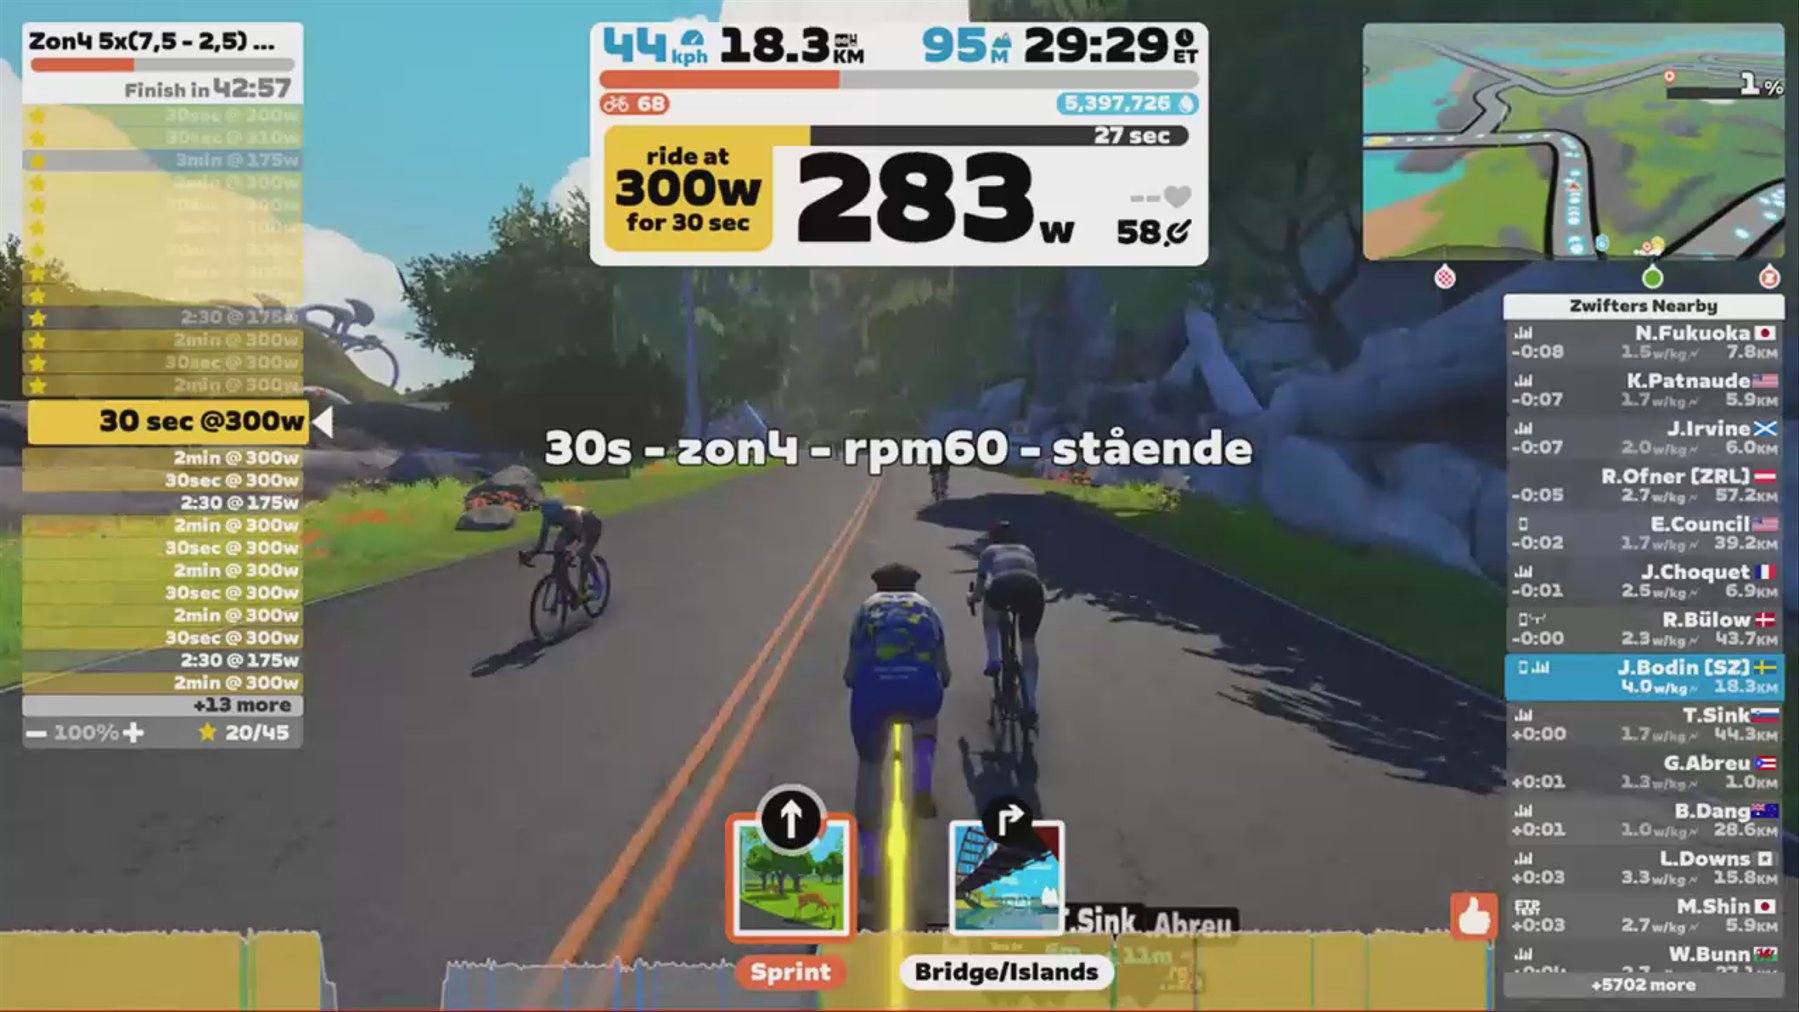 Zwift - Zon4 5x(7,5 - 2,5) rpm 60 styrkeintervall (Guided Heroes) in Watopia